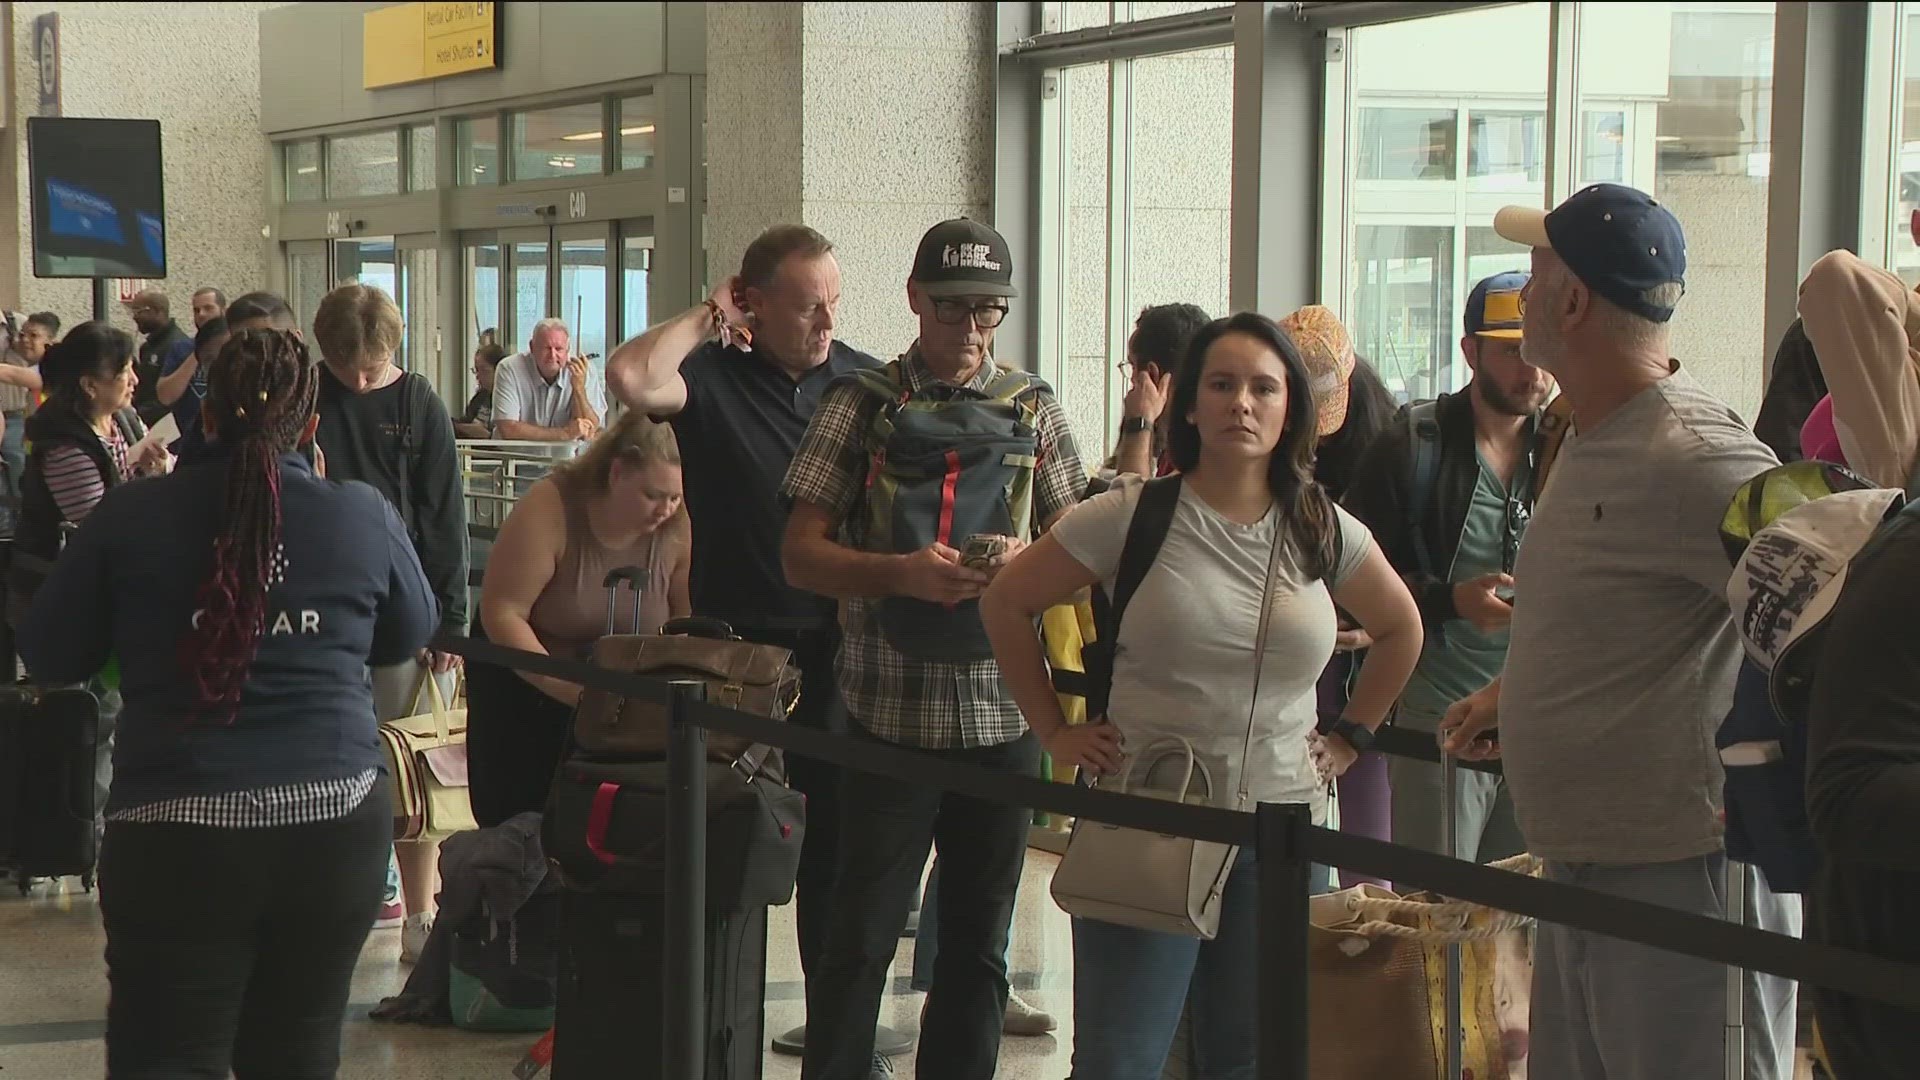 Staff at Austin's airport say they saw their busiest day ever on Monday.